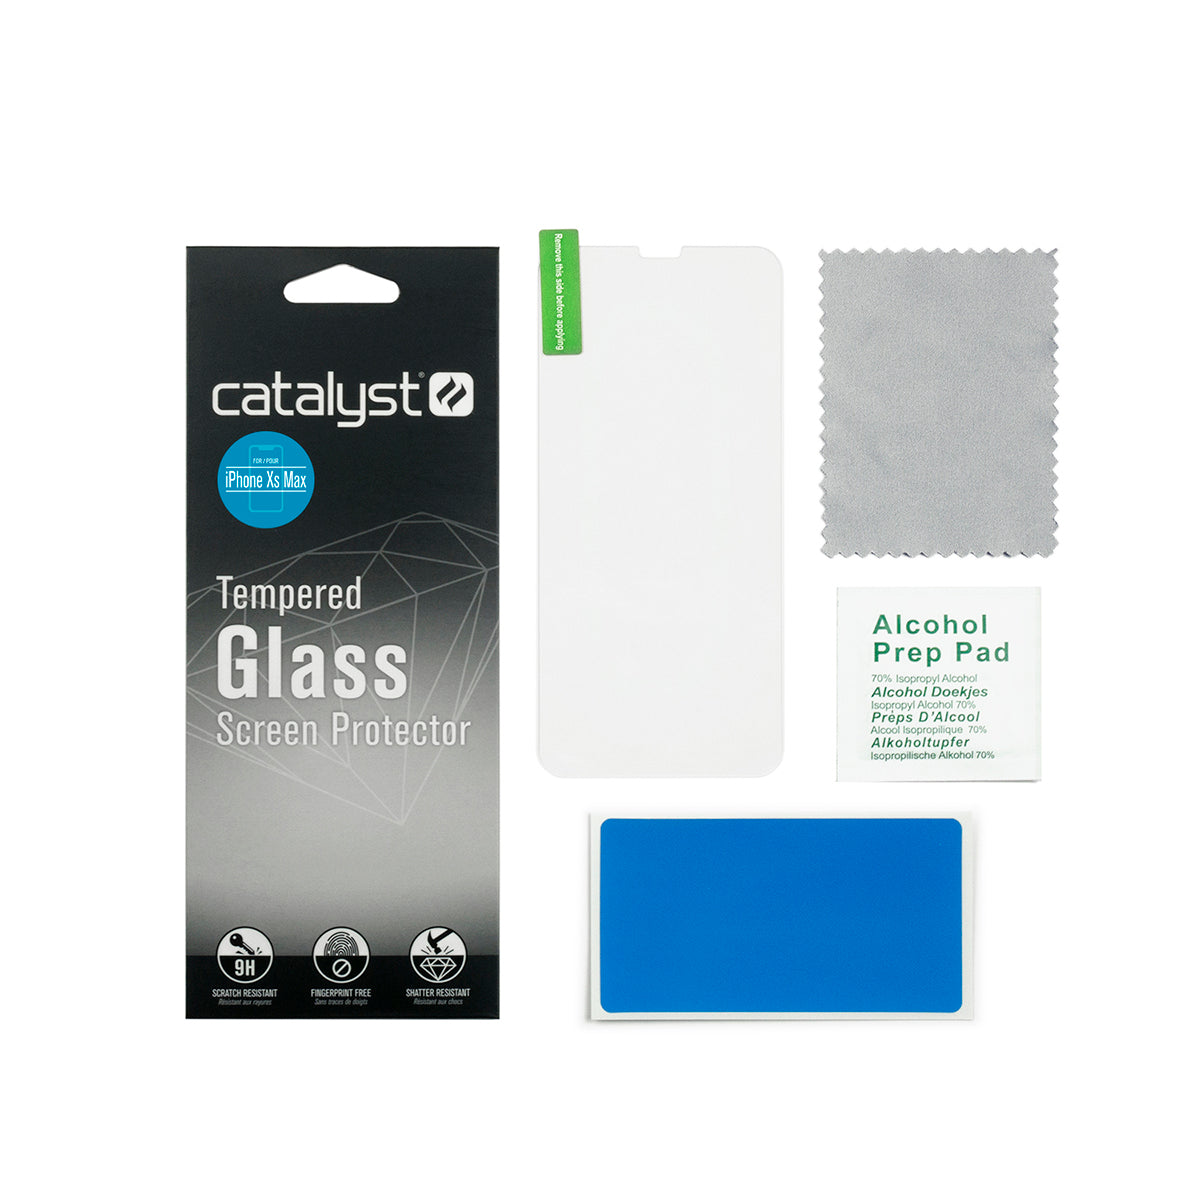 Catalyst Add a Tempered Glass Screen Protector inside the box includes packaging screen protector cleaning cloth alcohol wipe dust removal sticker text reads packaging screen protector cleaning cloth alcohol wipe dust removal sticker alcohol prep pad